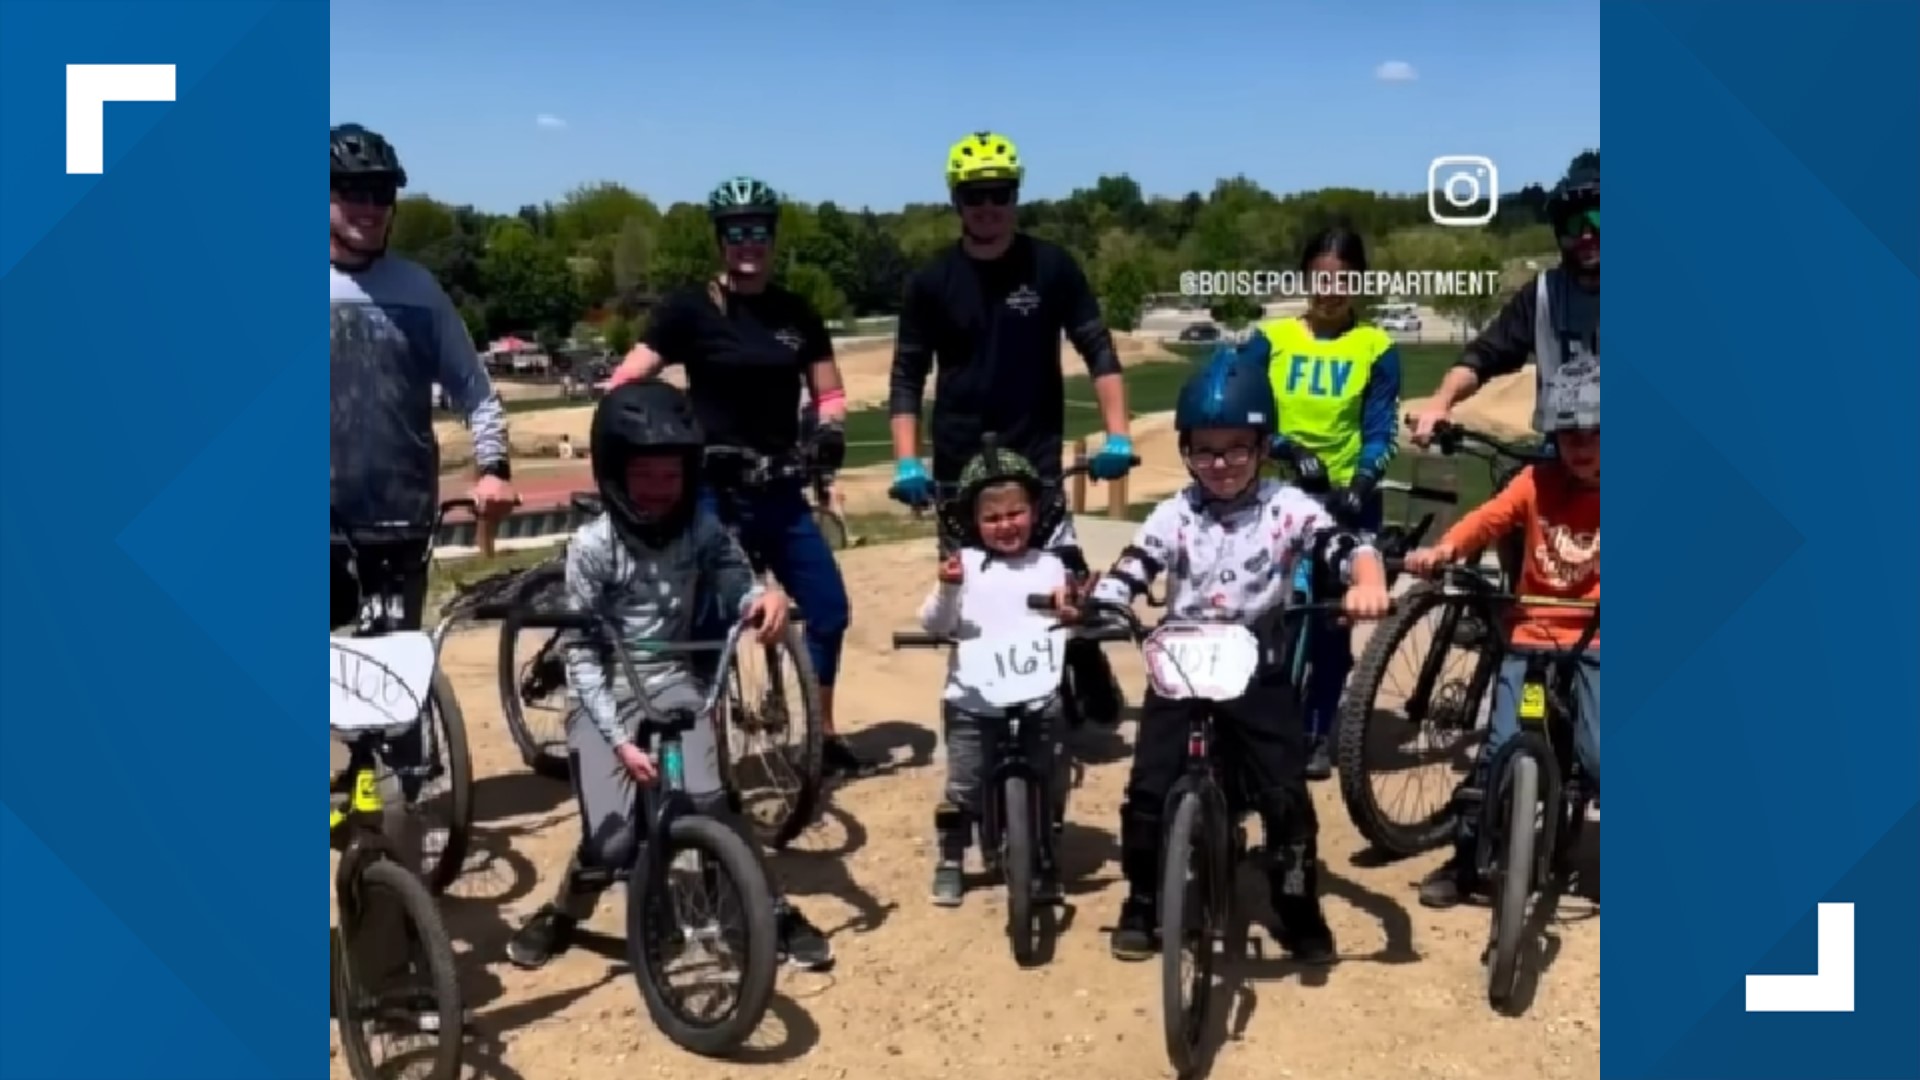 During Saturday's BMX with a Cop event, kids between the ages of 9 and 16 joined officers with the Boise Police Department for some fast-paced fun.